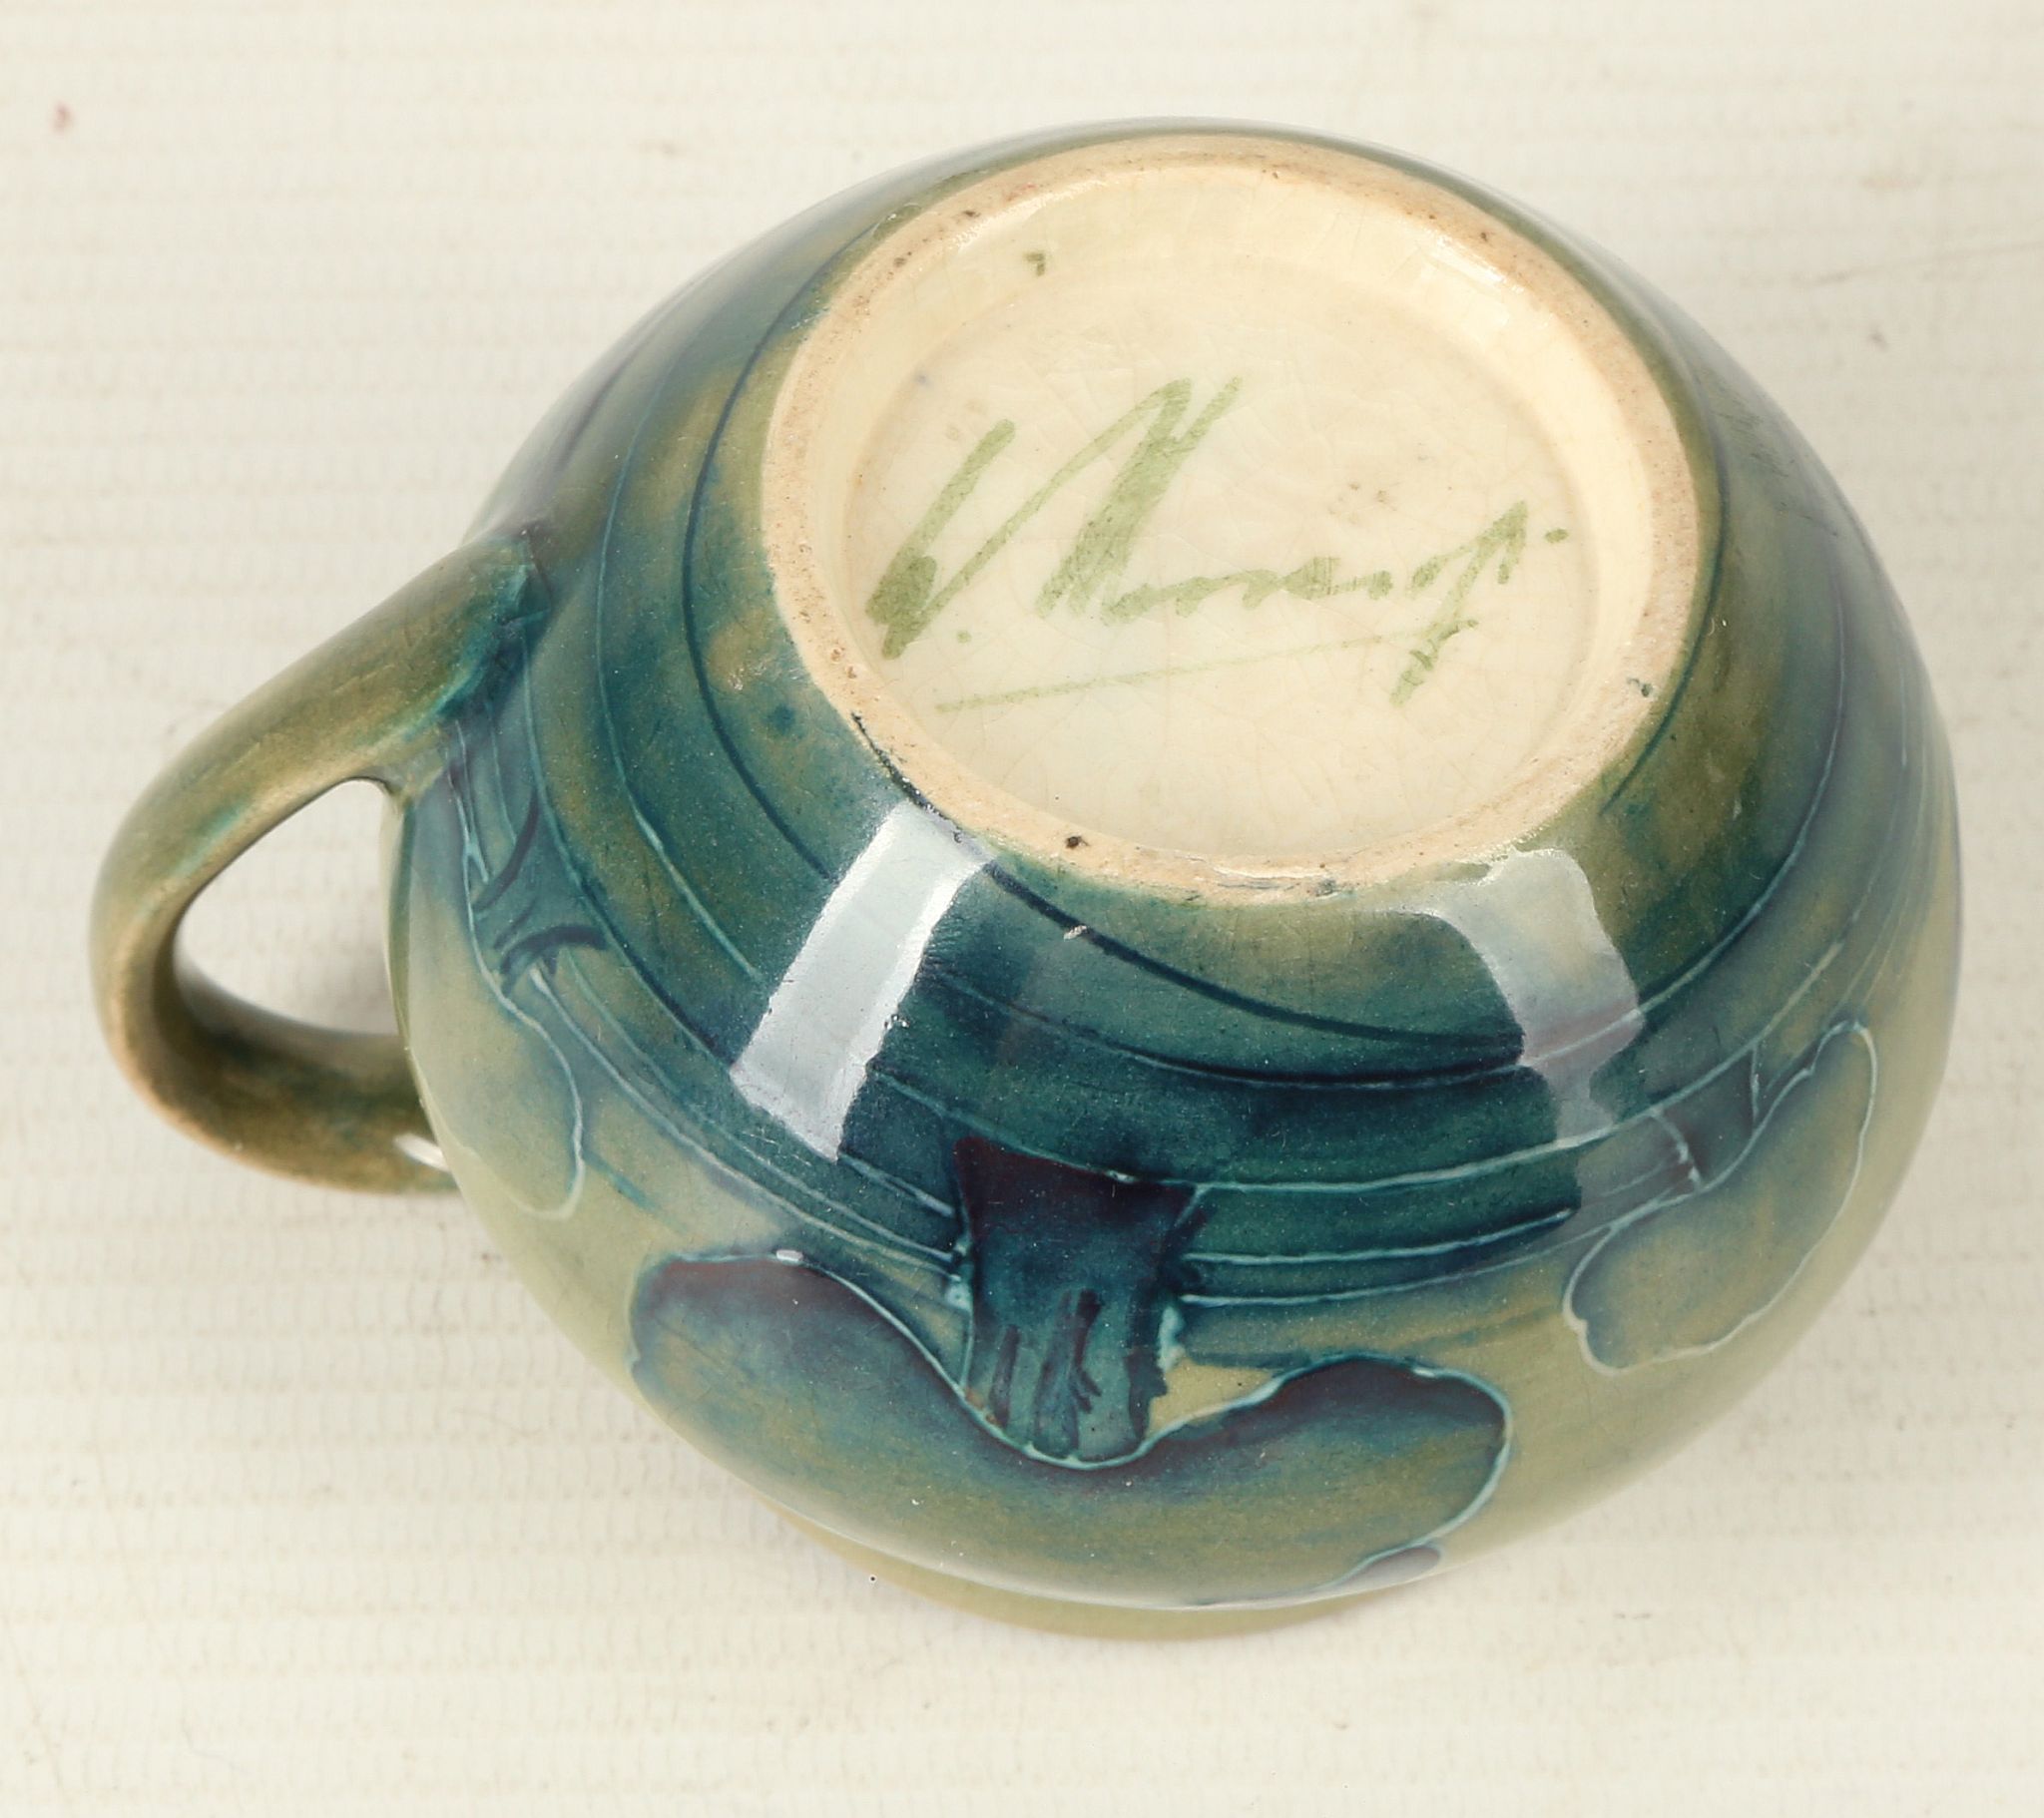 A WILLIAM MOORCROFT POTTERY MINIATURE JUG, tube-lined with trees, in 'Hazeldene' pattern, c.1920, - Image 2 of 2